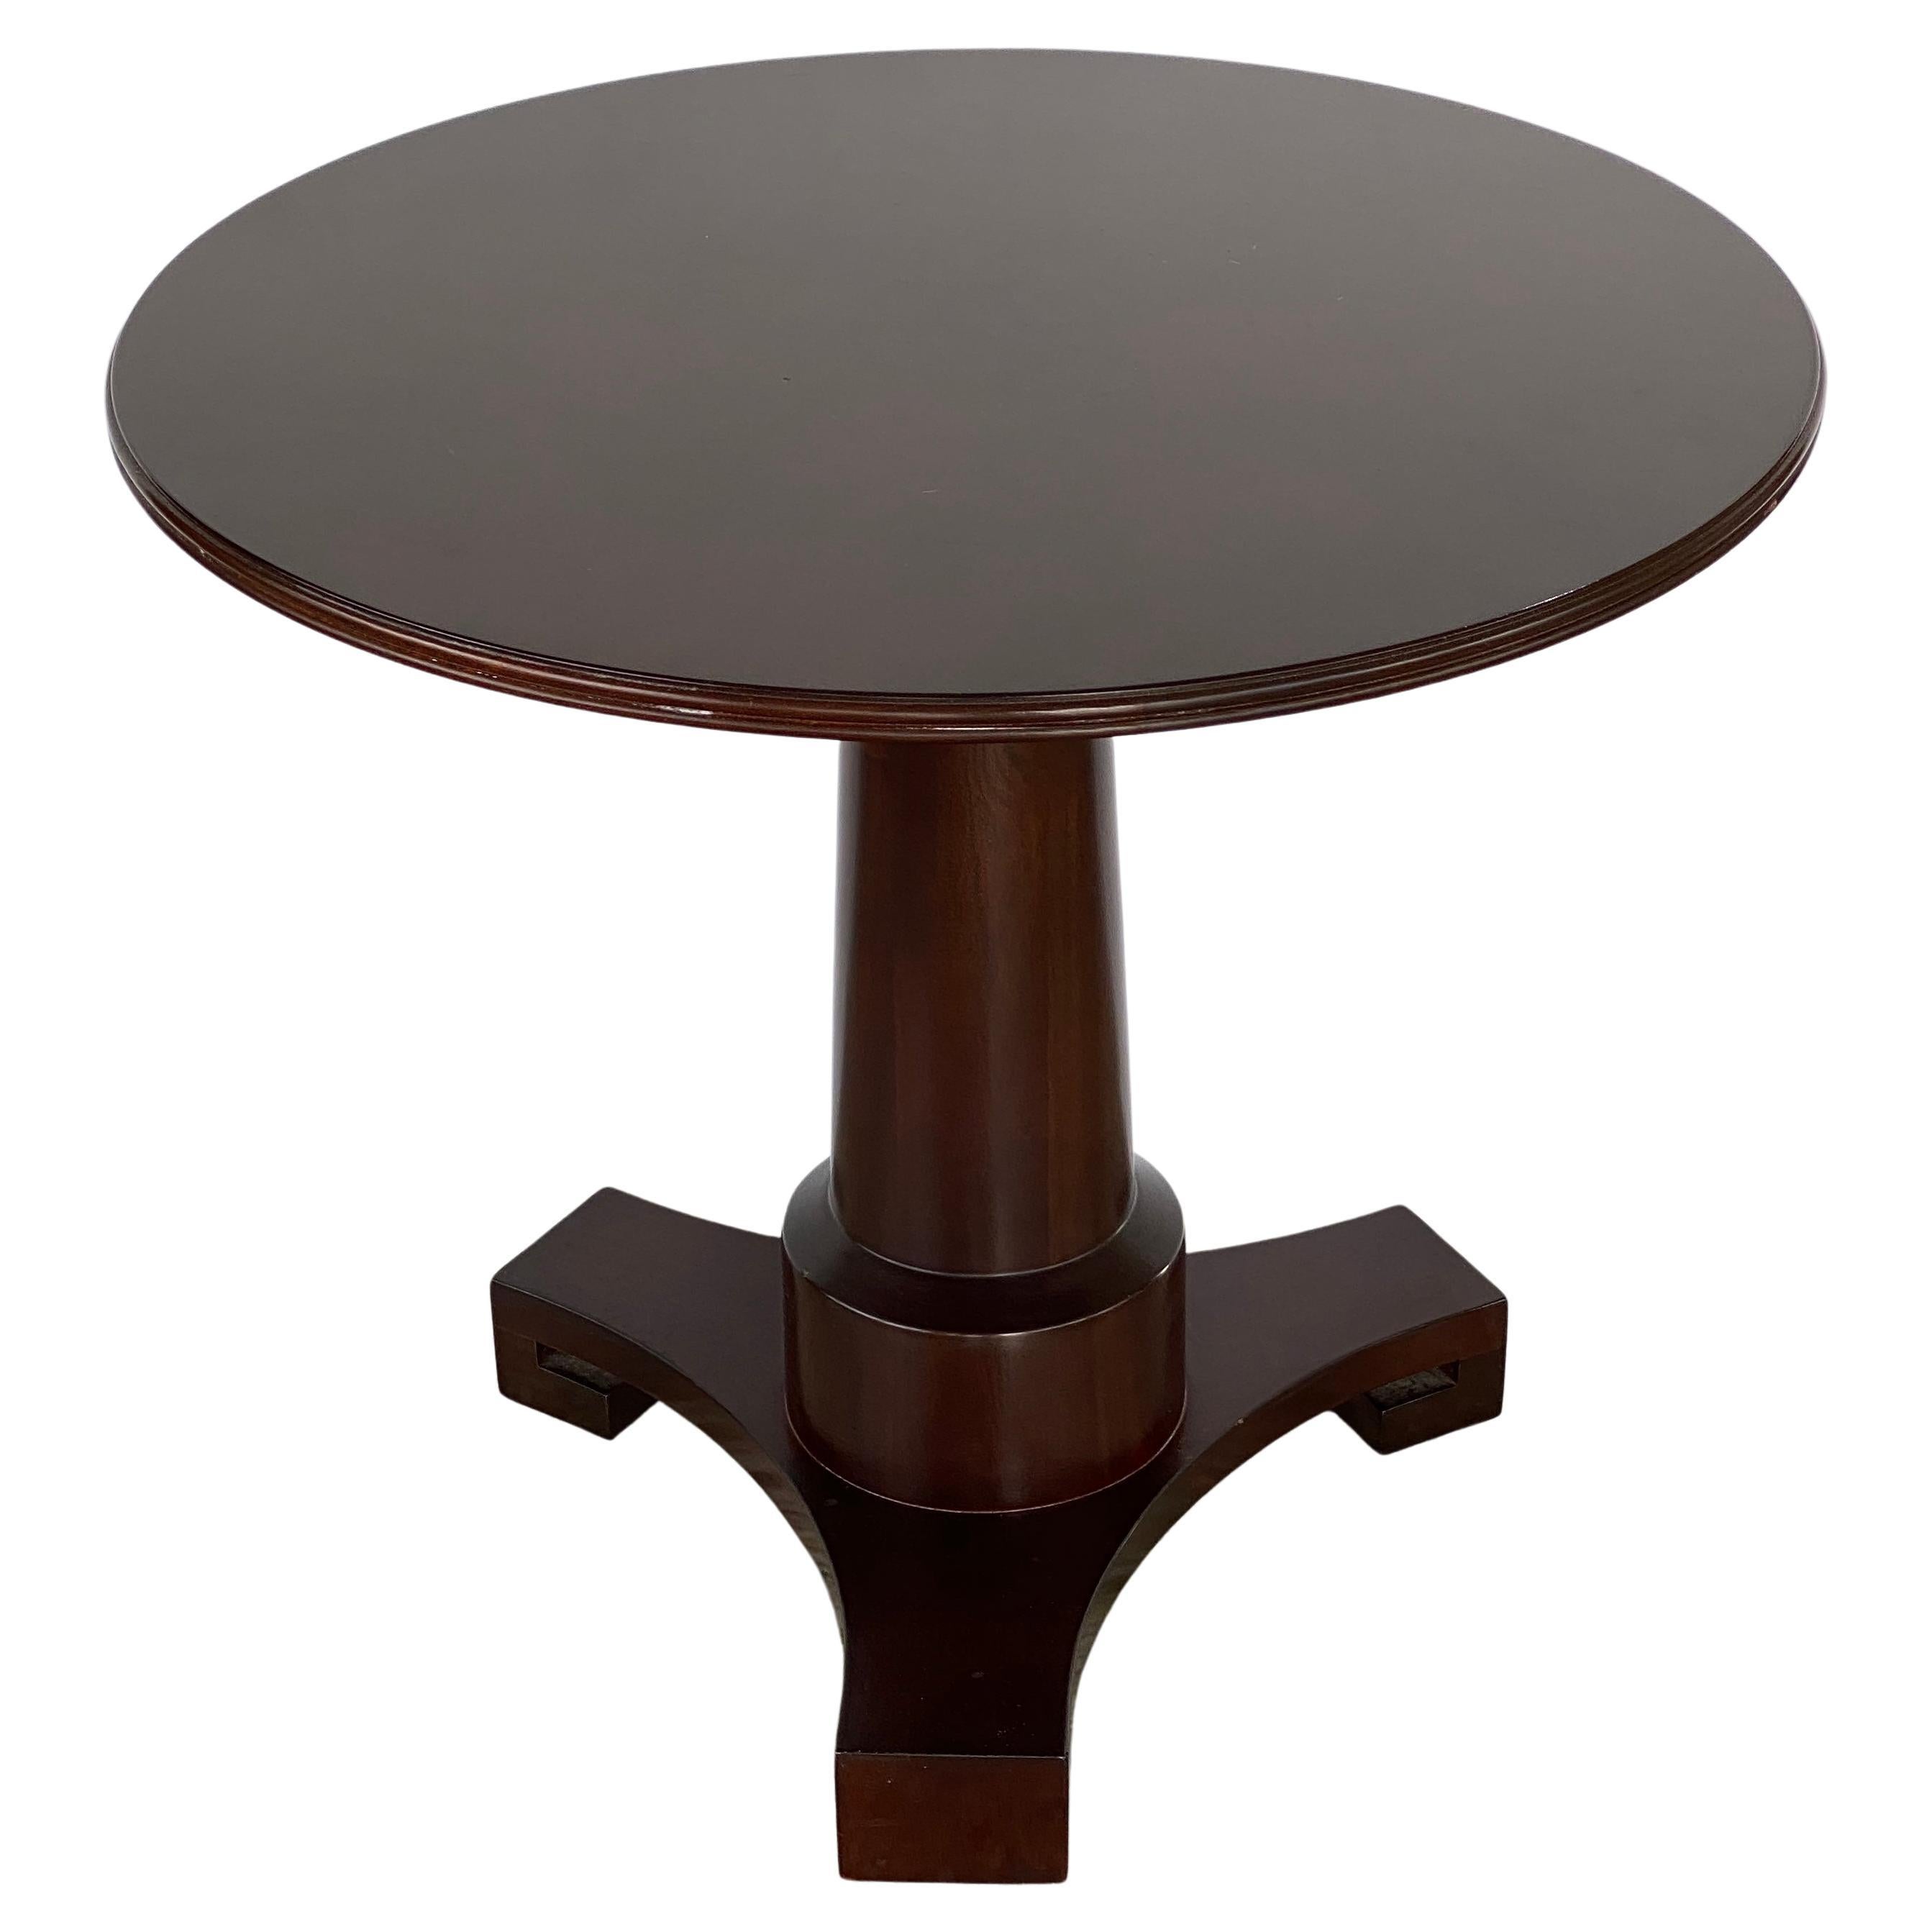 This stylish and chic French Empire revival side table was created in the 1980s-1990s, by the American firm of Baker Furniture. 

The piece is fabricated in mahogany and burl veneers in a deep mahogany coloration. 

Note: The top has a few